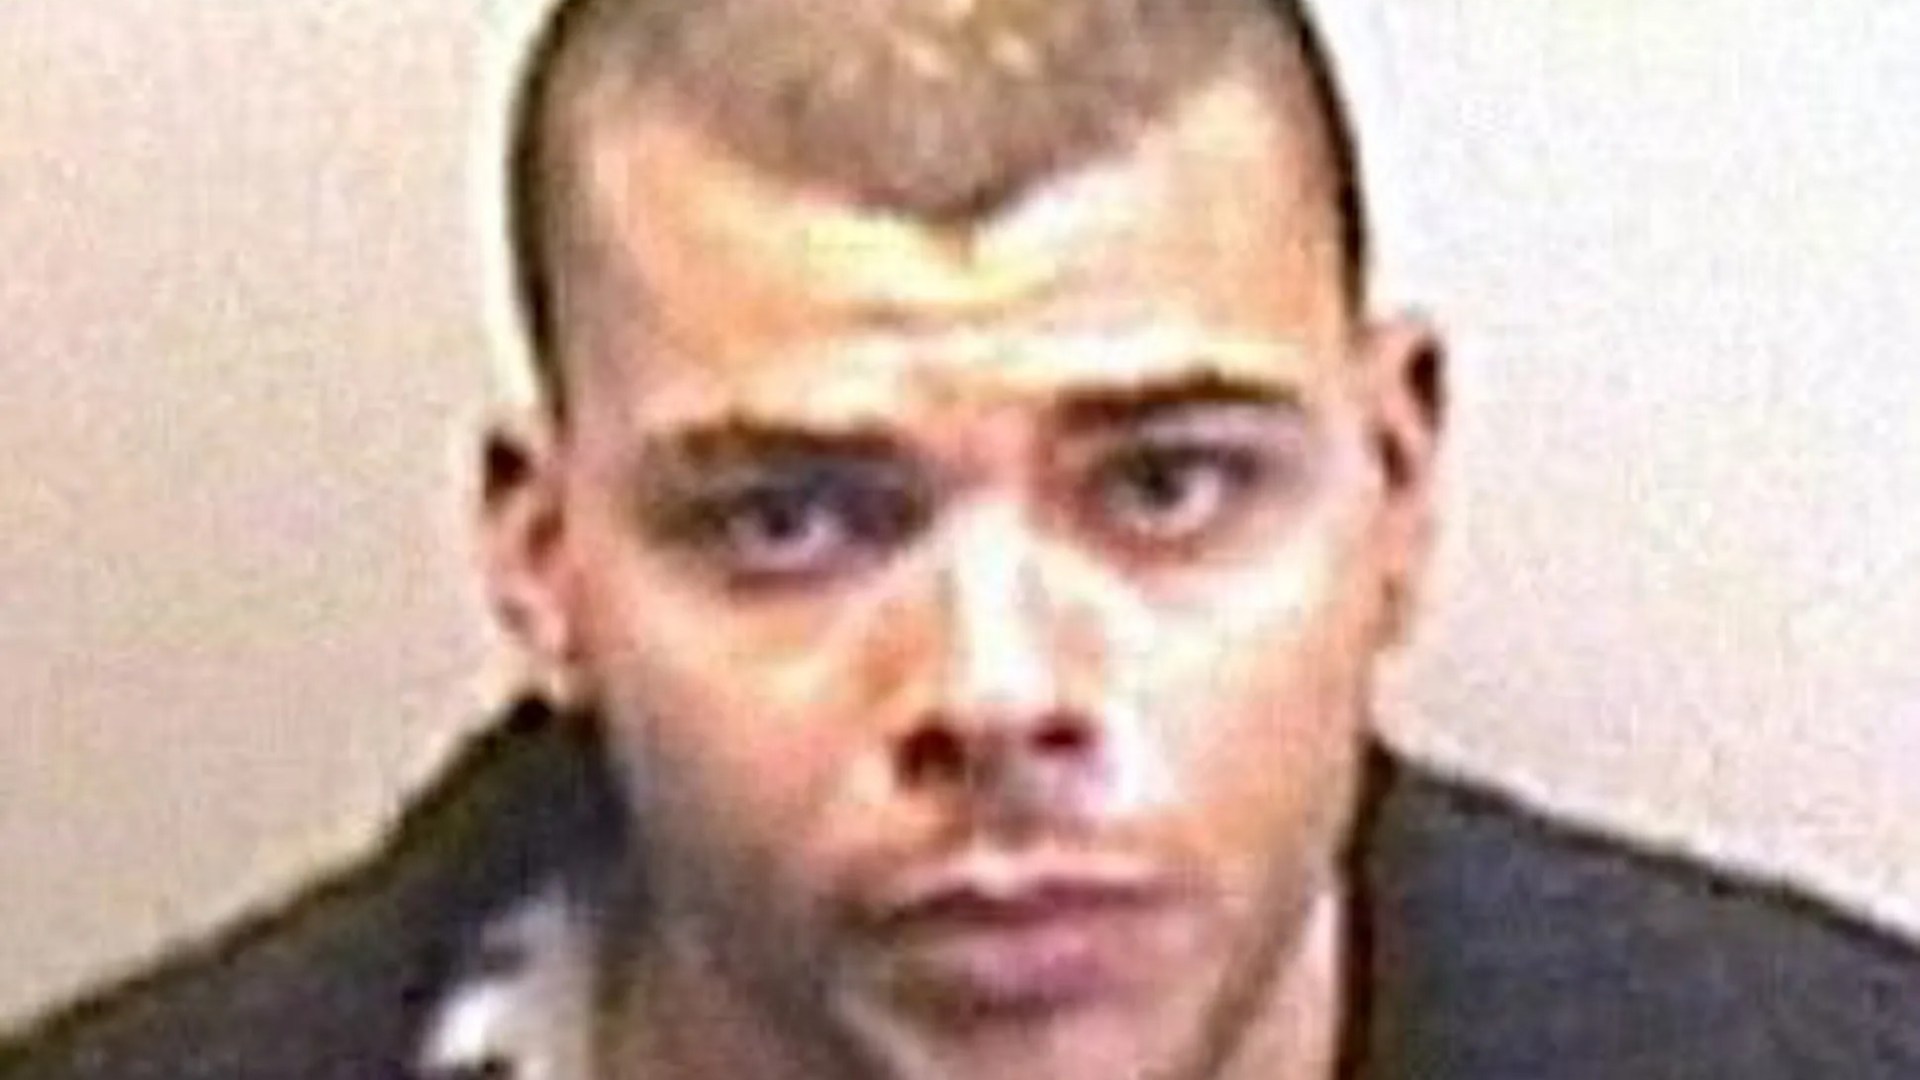 Crook who paid back just £420 after bagging £1.9m in UK’s biggest robbery demands compo after being slung back in jail